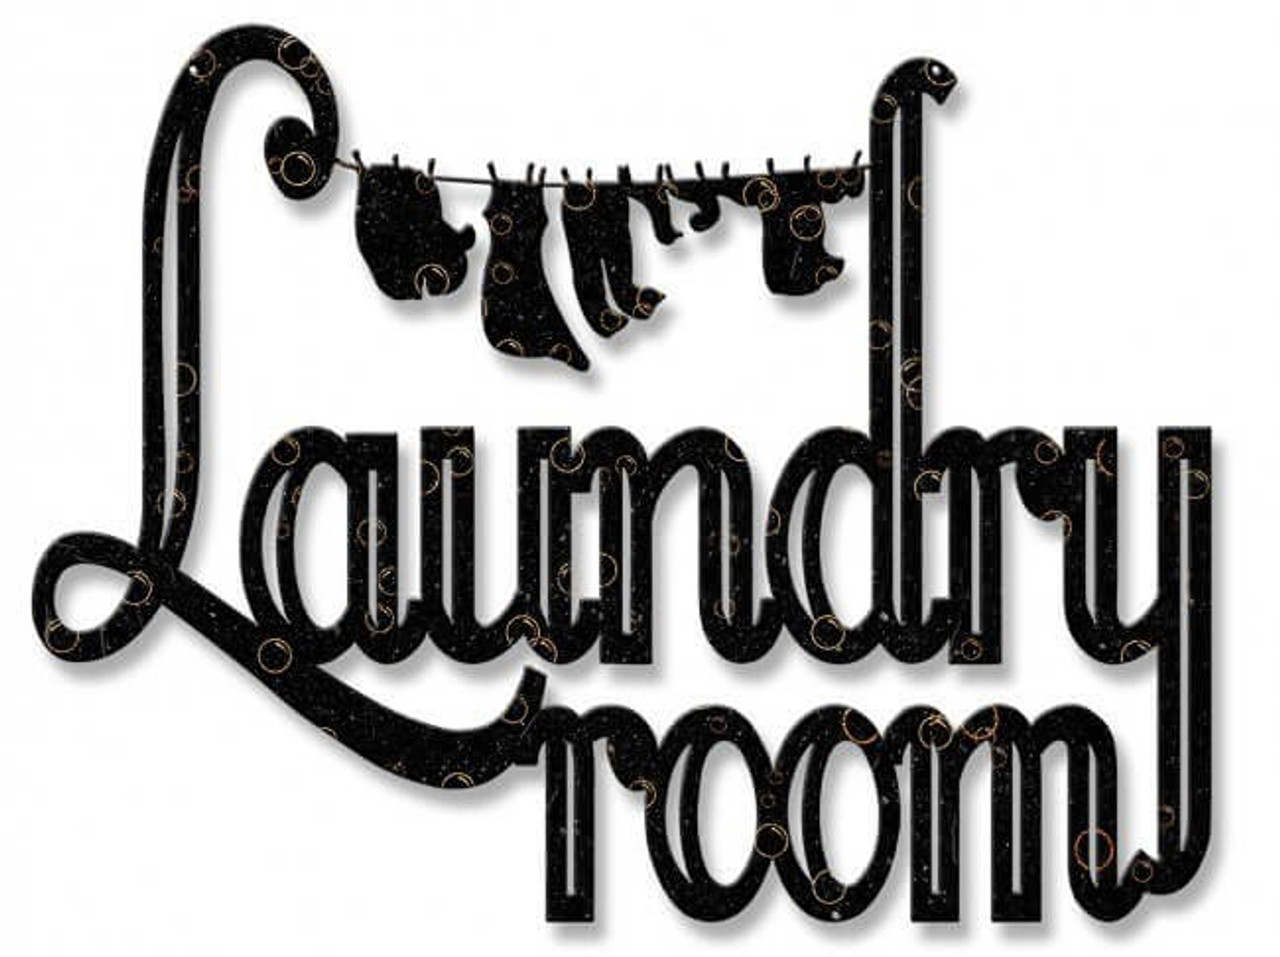 Laundry Room Clothes Line Silhouette Metal Shape Sign 17 x 13 Inches